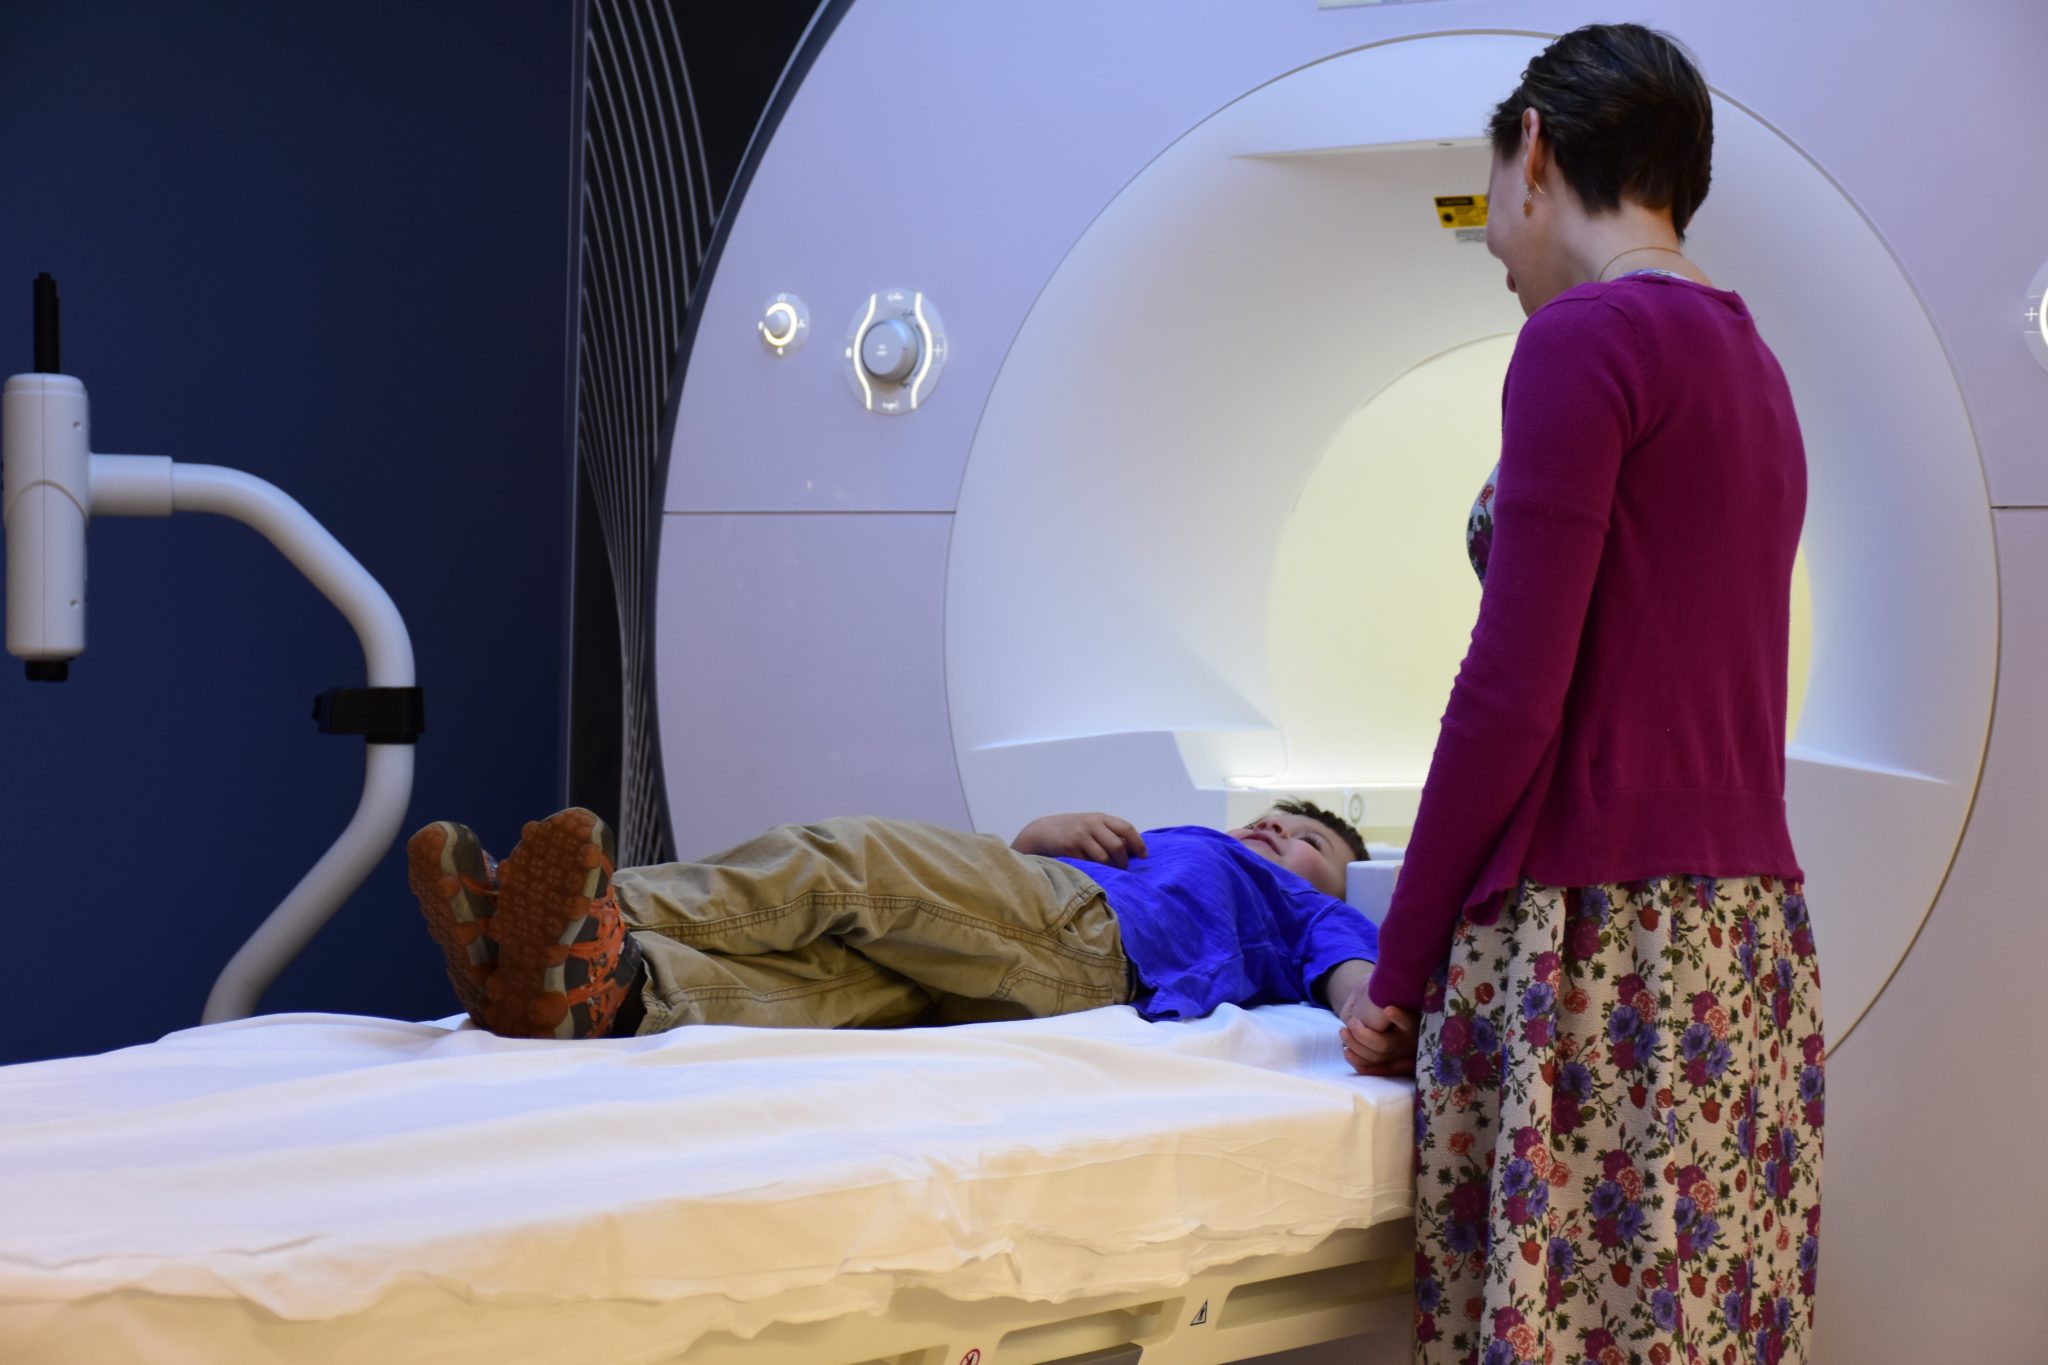 A child gets an MRI done as his mother watches